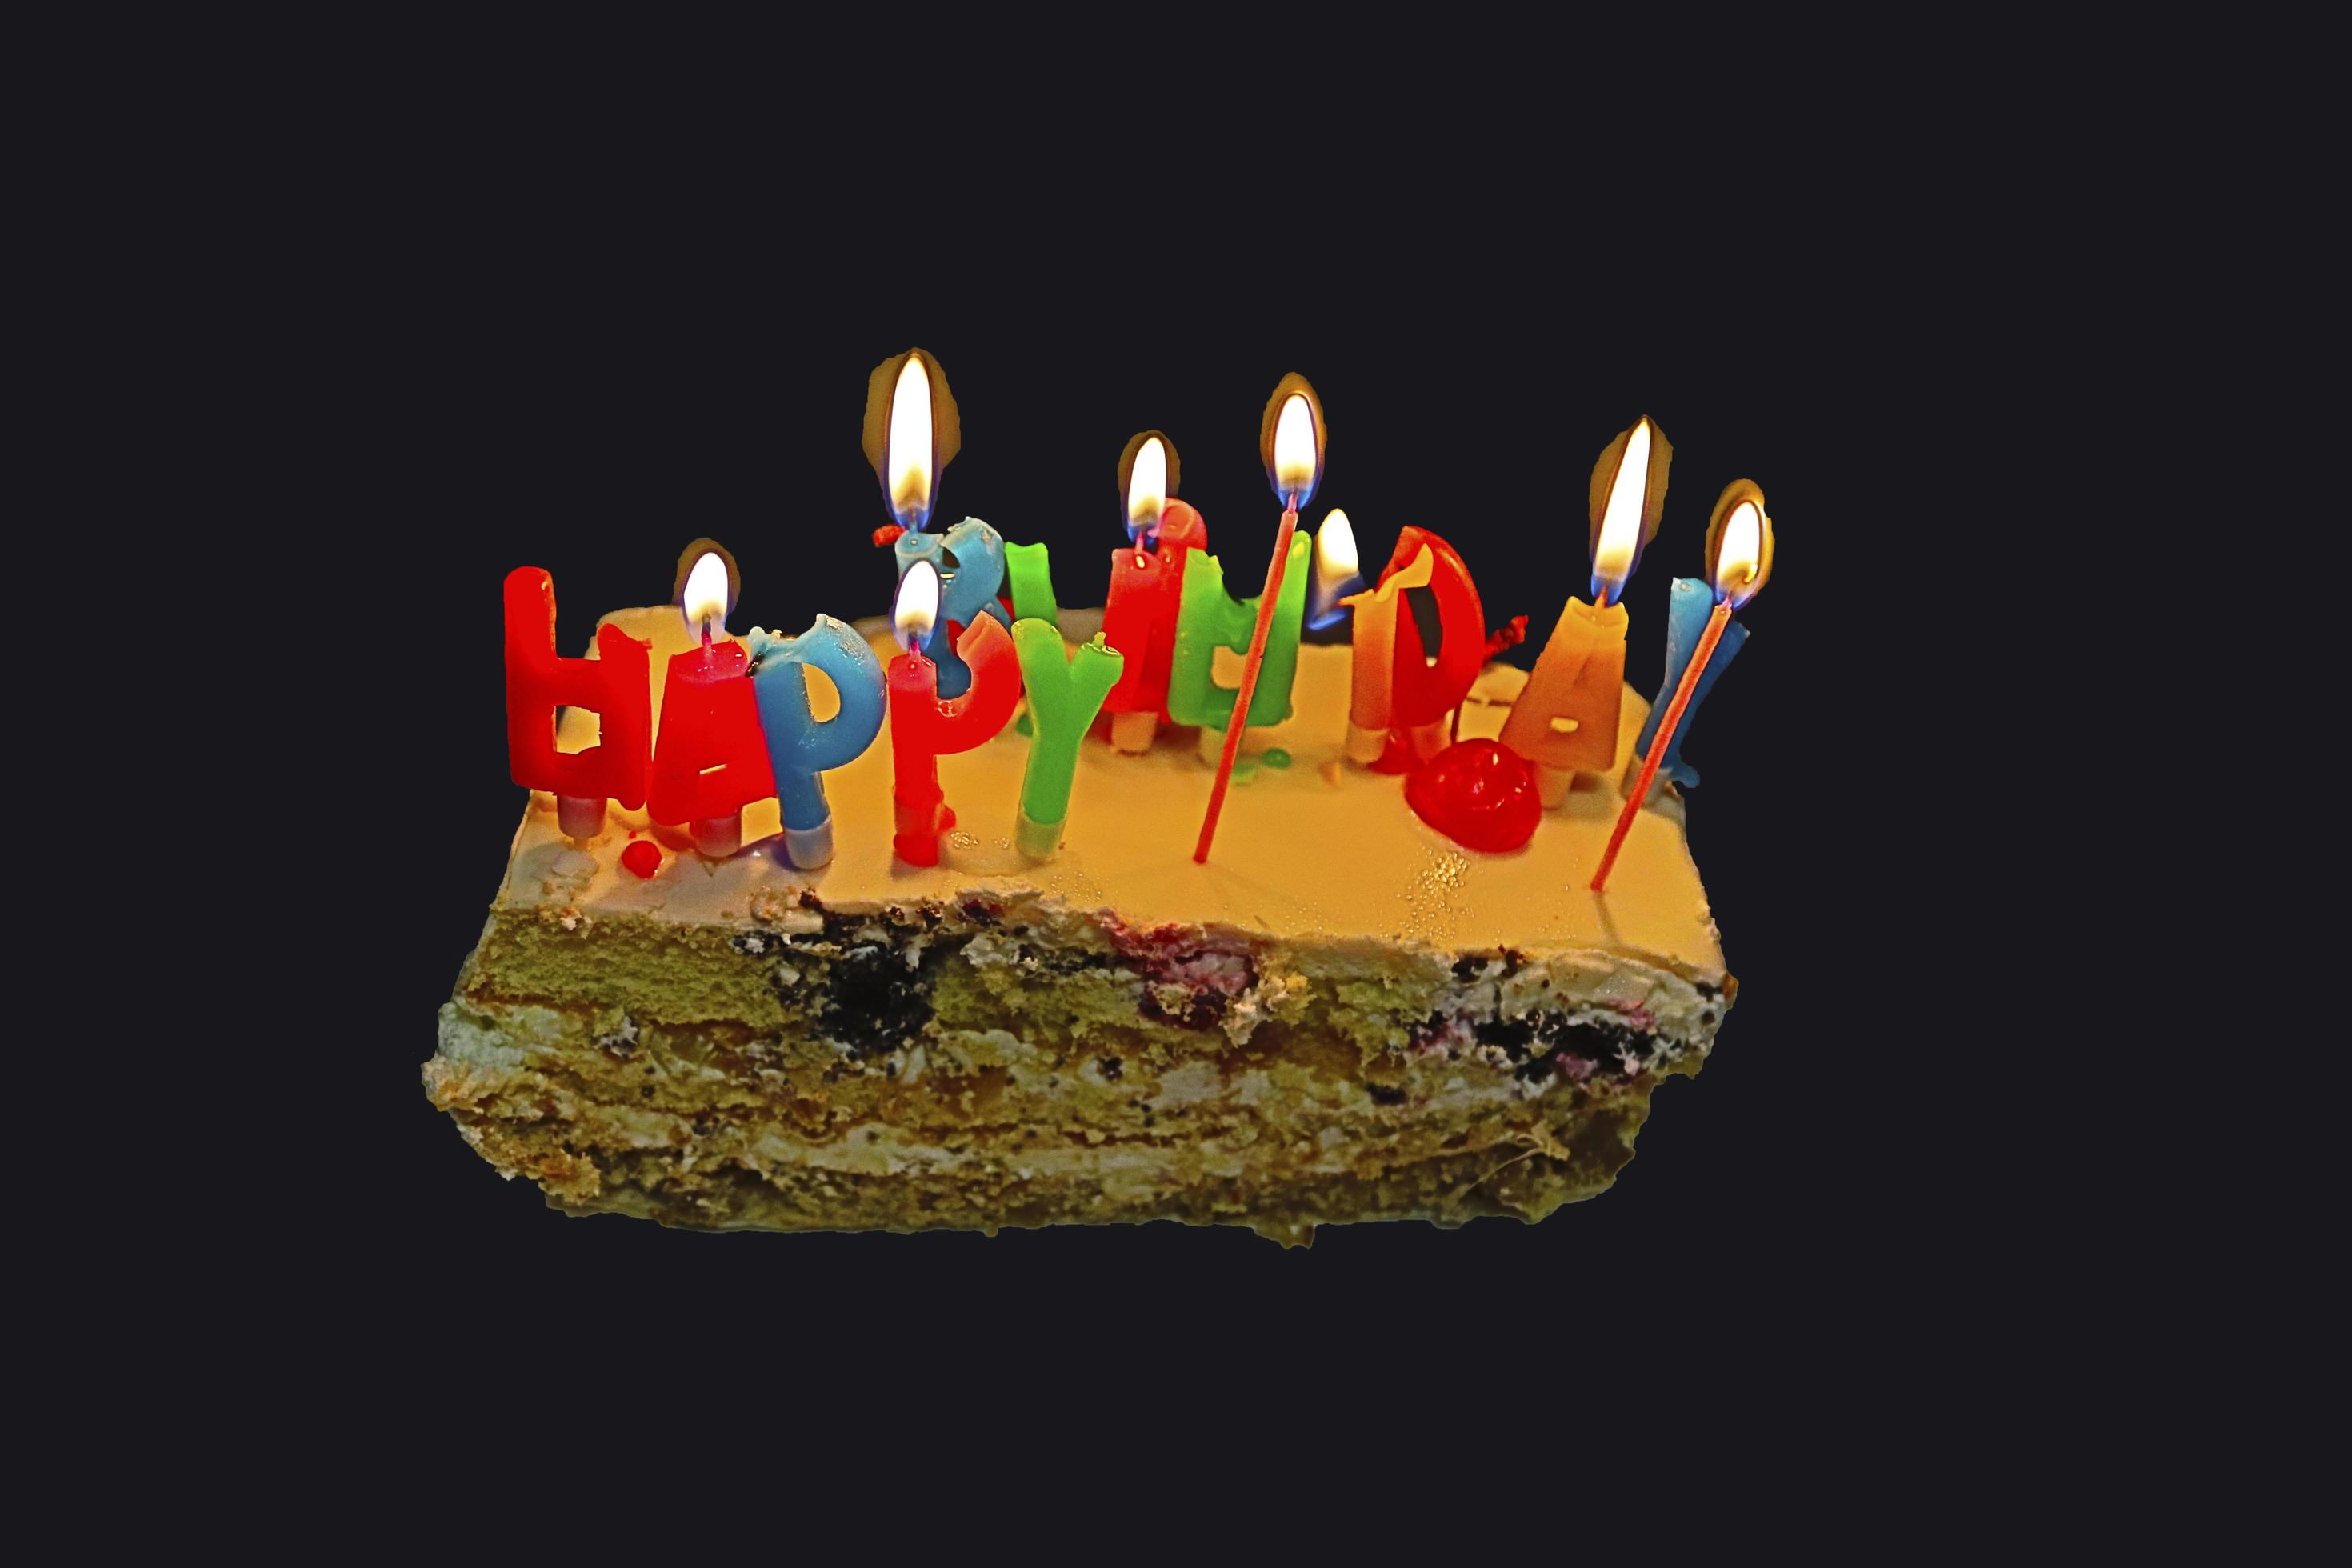 A cake with candles on it is shown - Birthday